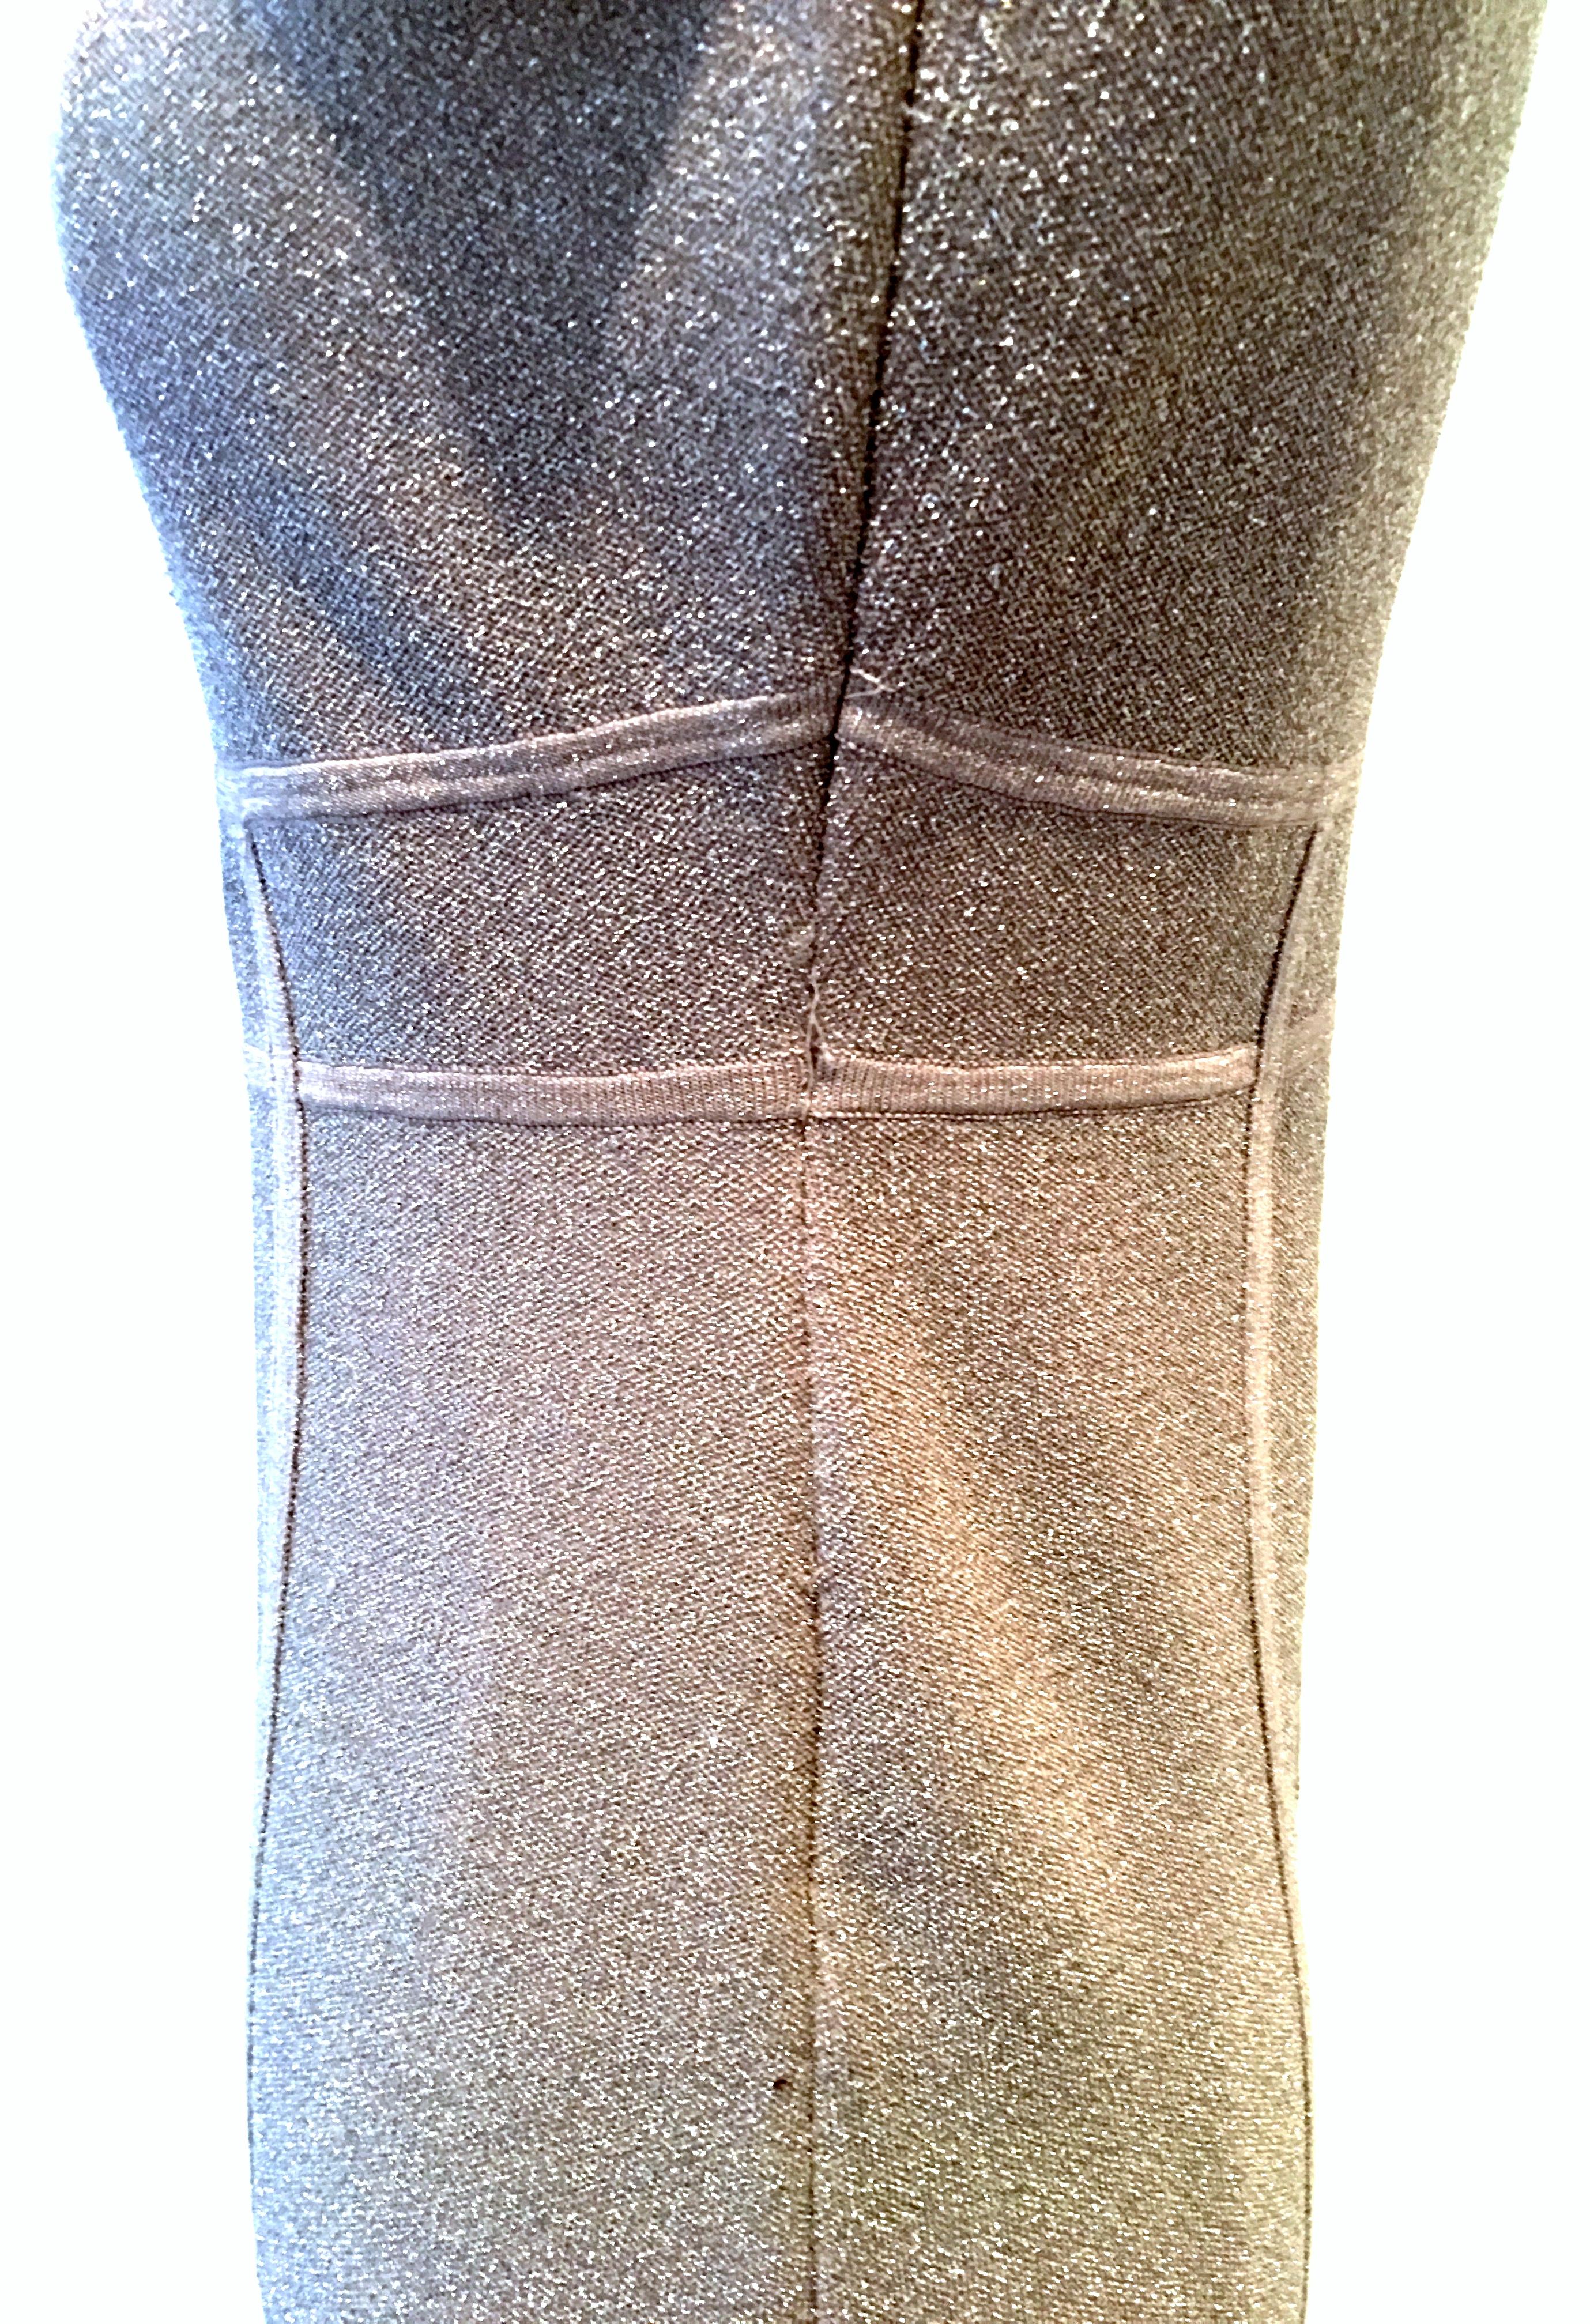 Women's or Men's 21st Century Herve Leger Style Metallic Cocktail Dress By Maxazria For BCBG  For Sale